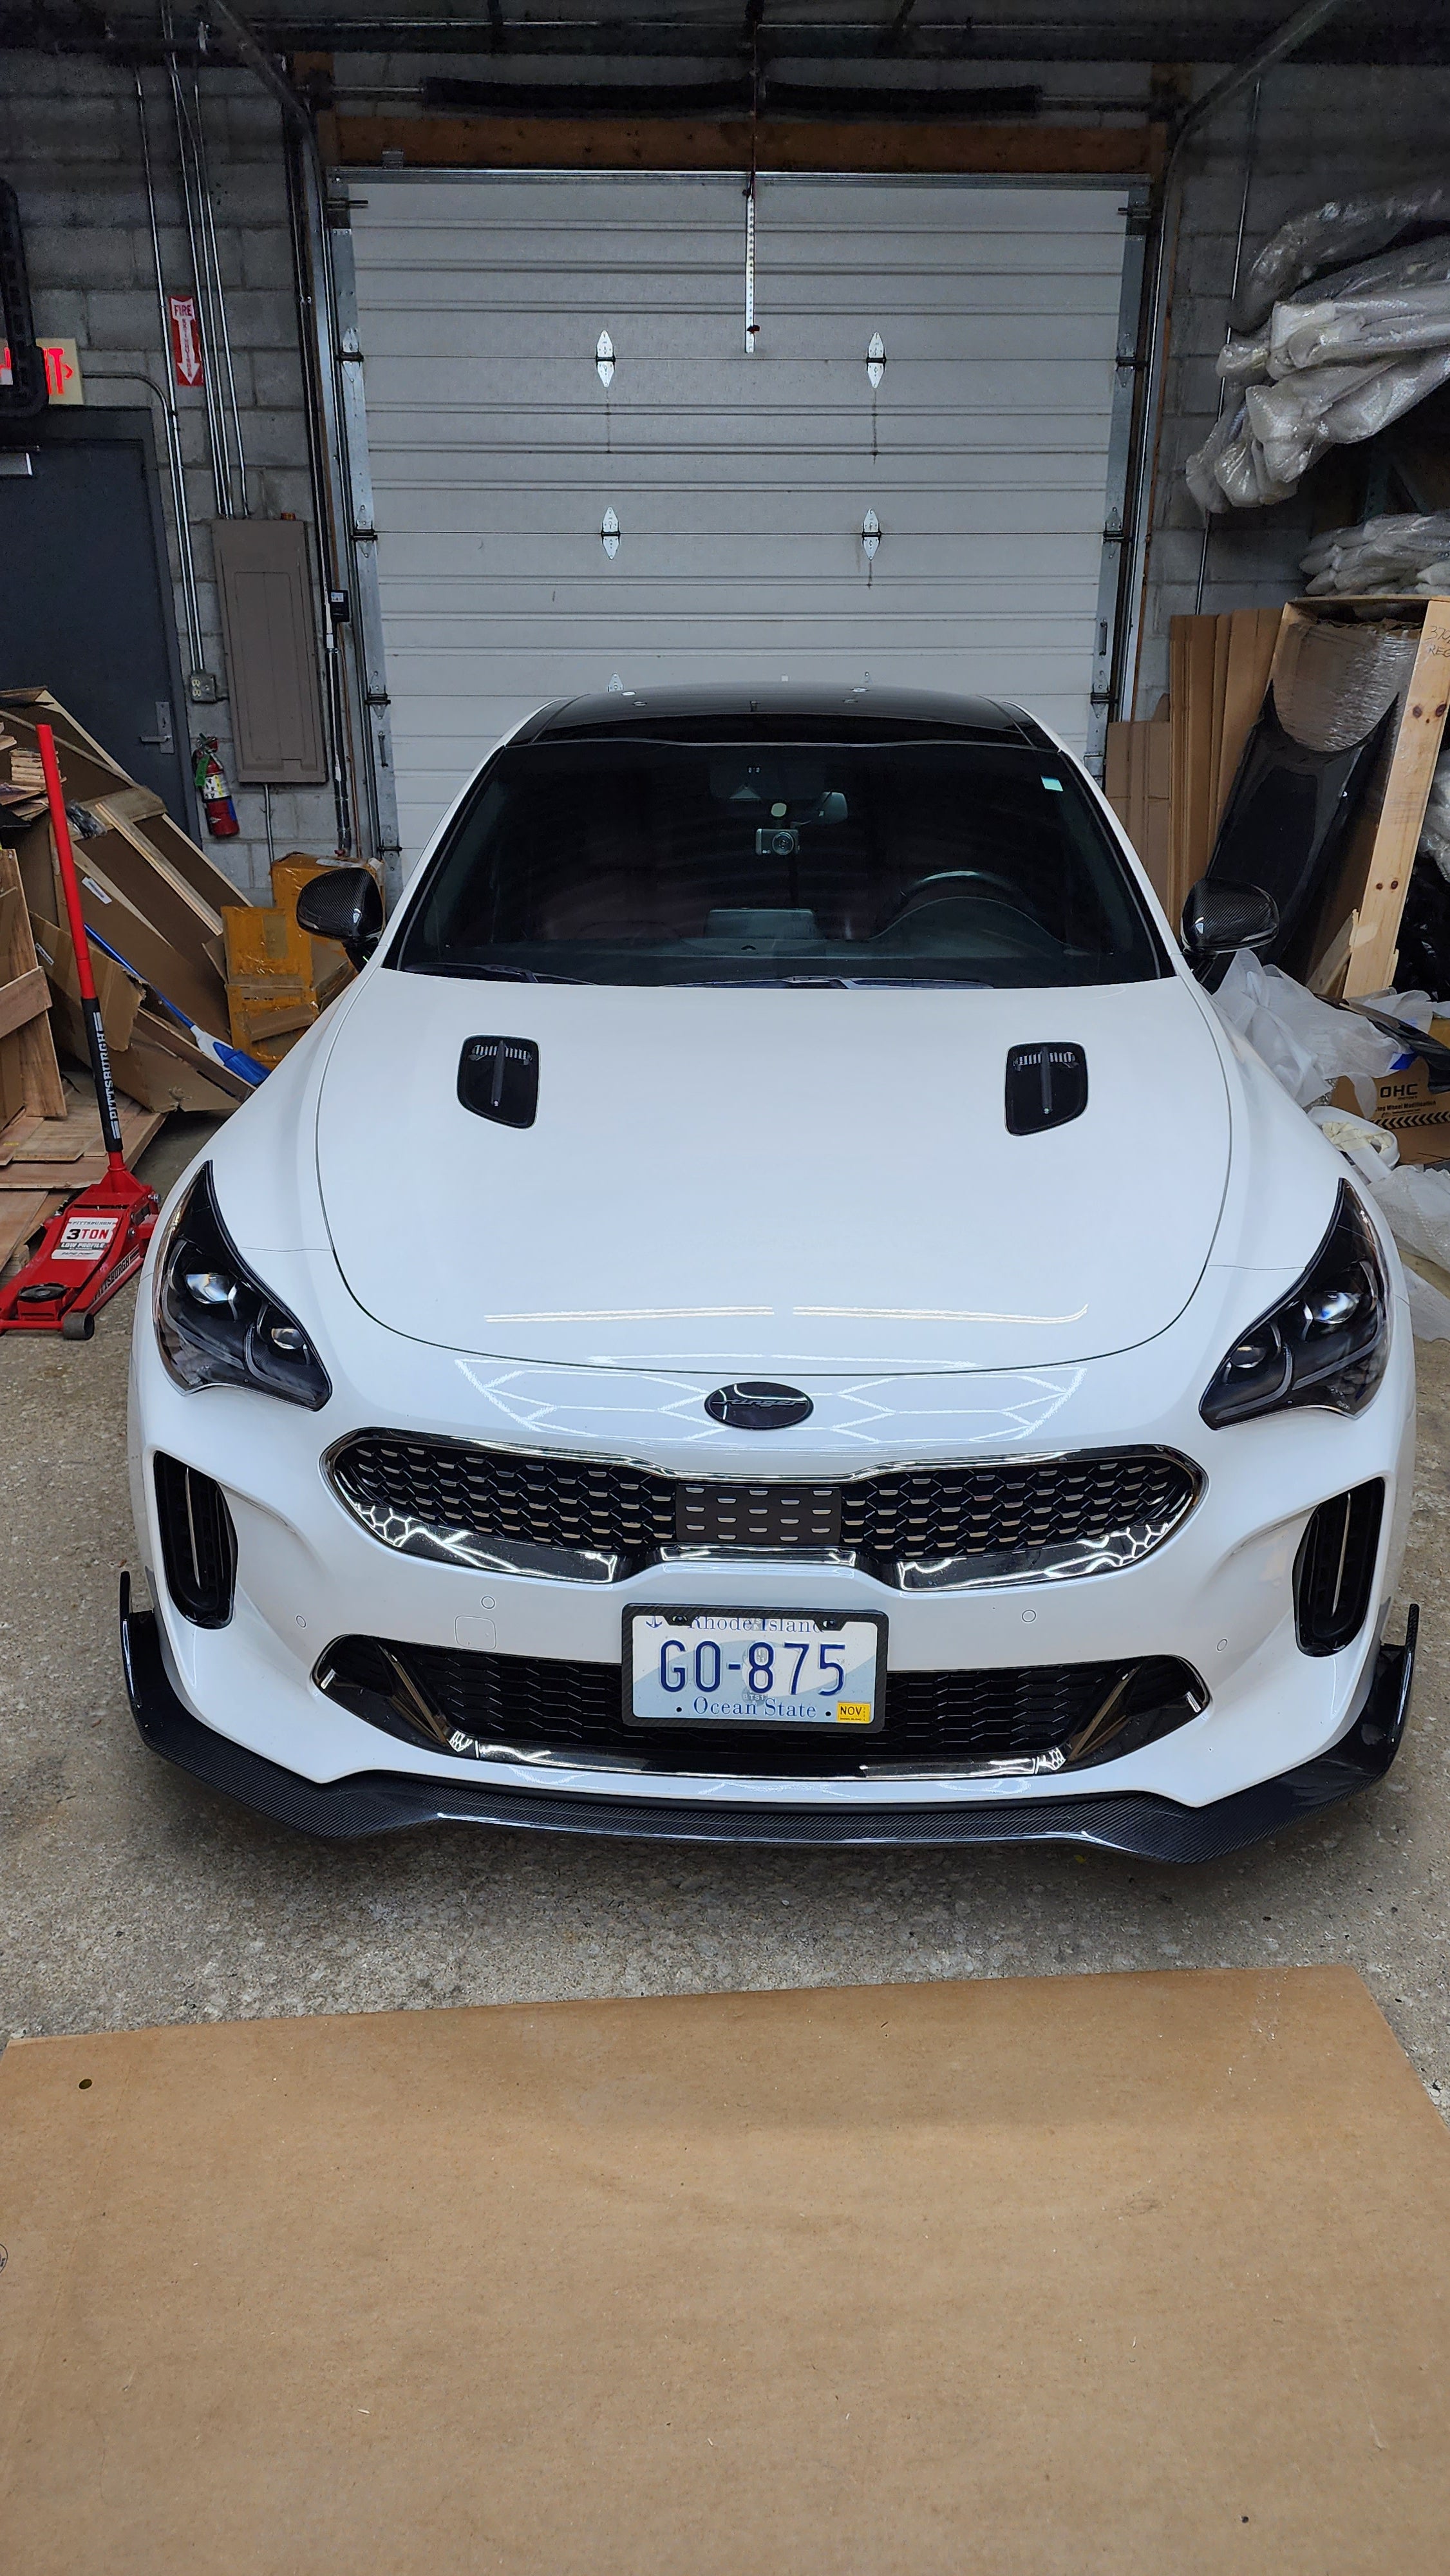 Wide front shot of the Kia Stinger with Jalisco's Front Lip, illustrating how the lip complements the vehicle's dynamic front fascia.